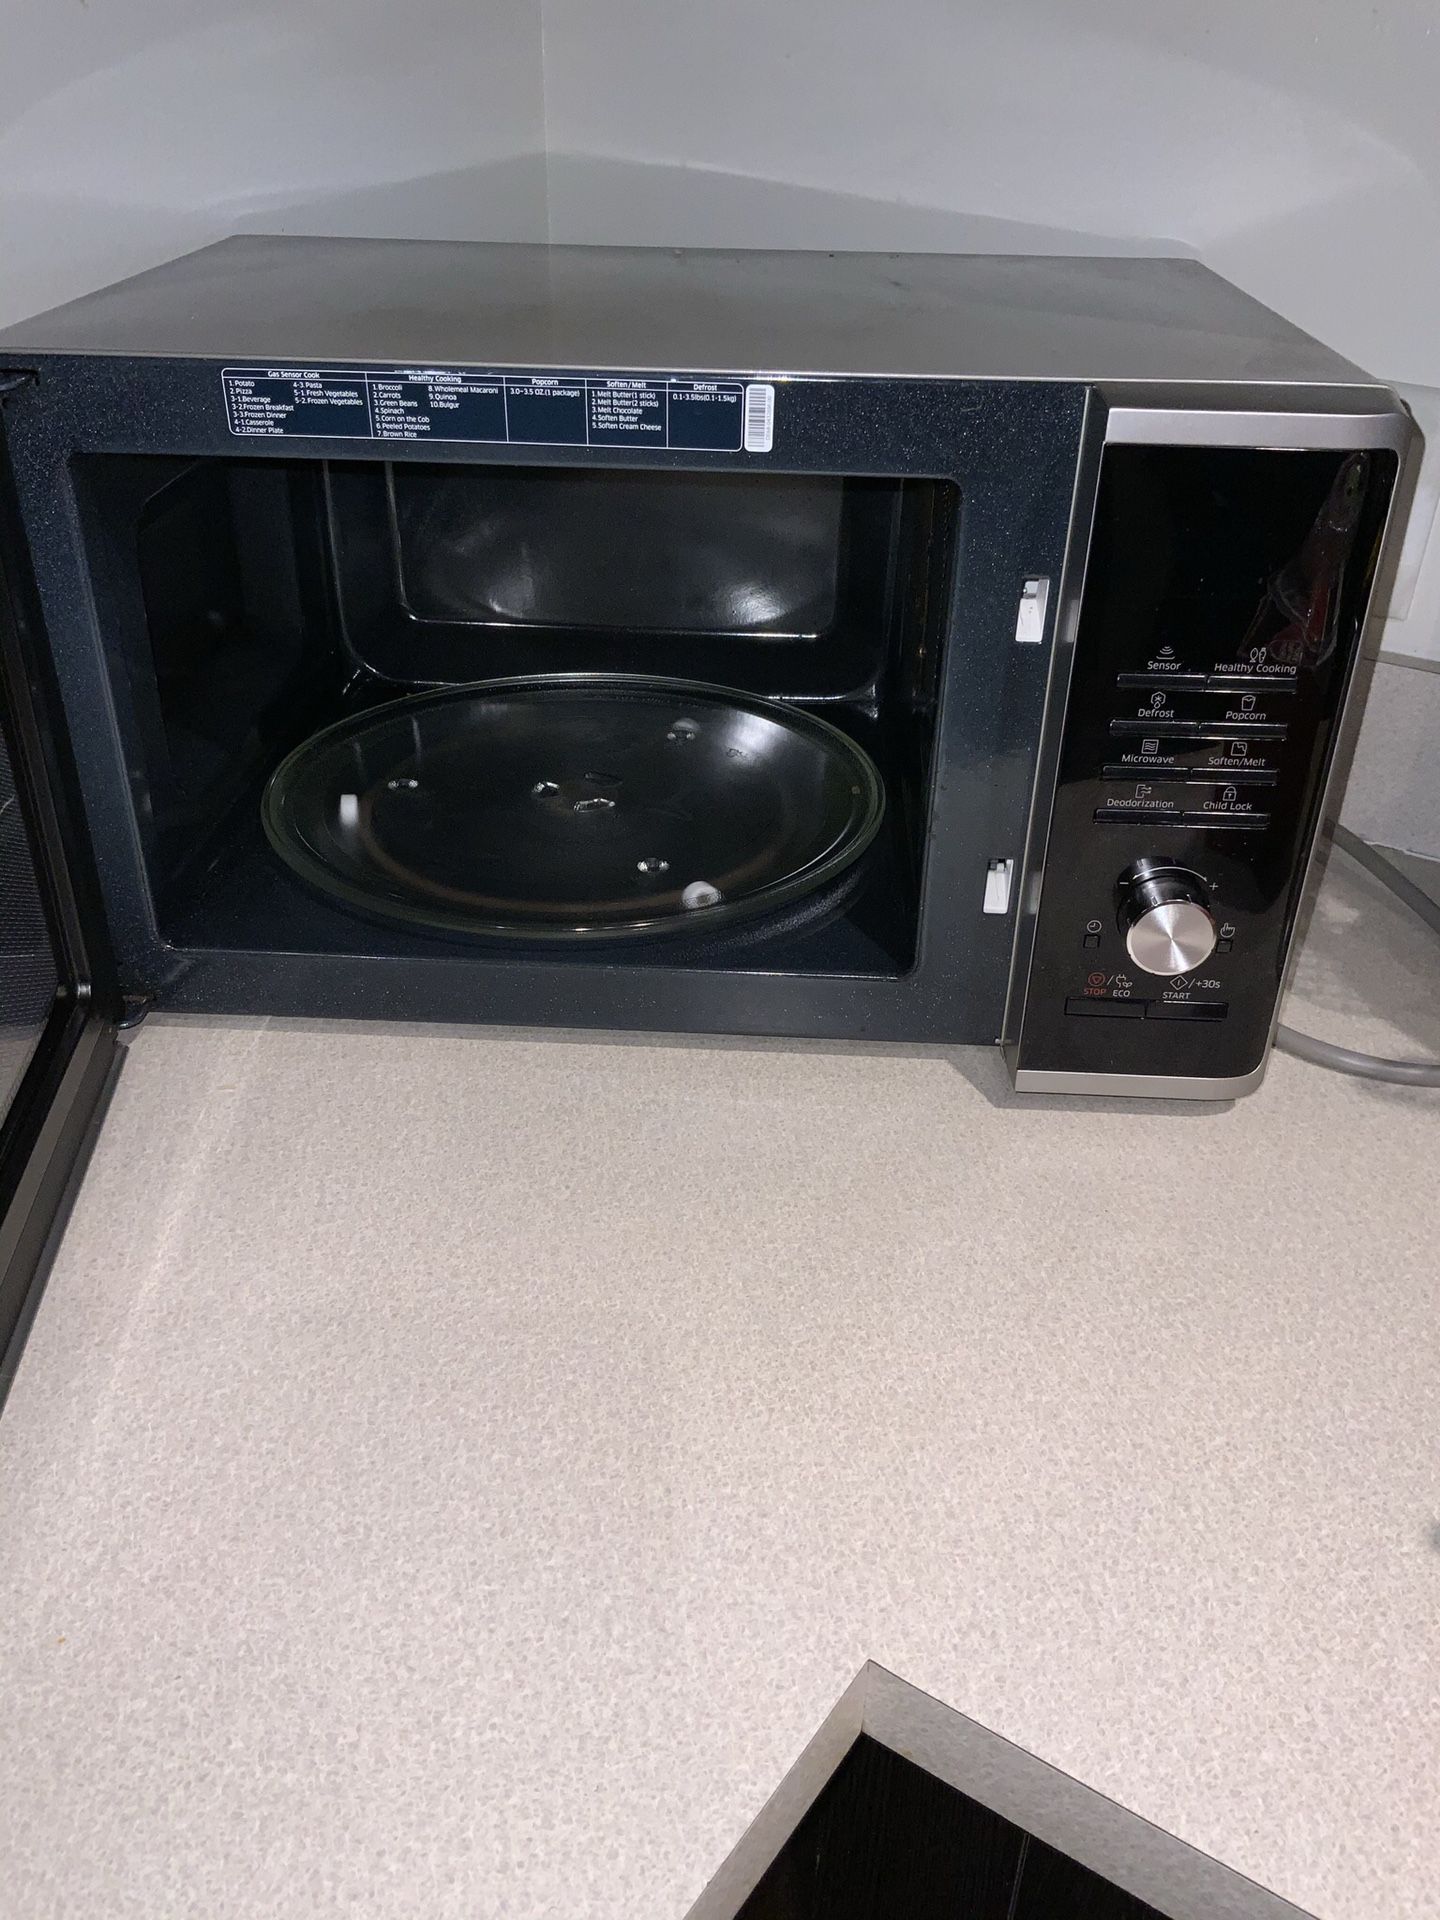 Samsung Microwave mint condition